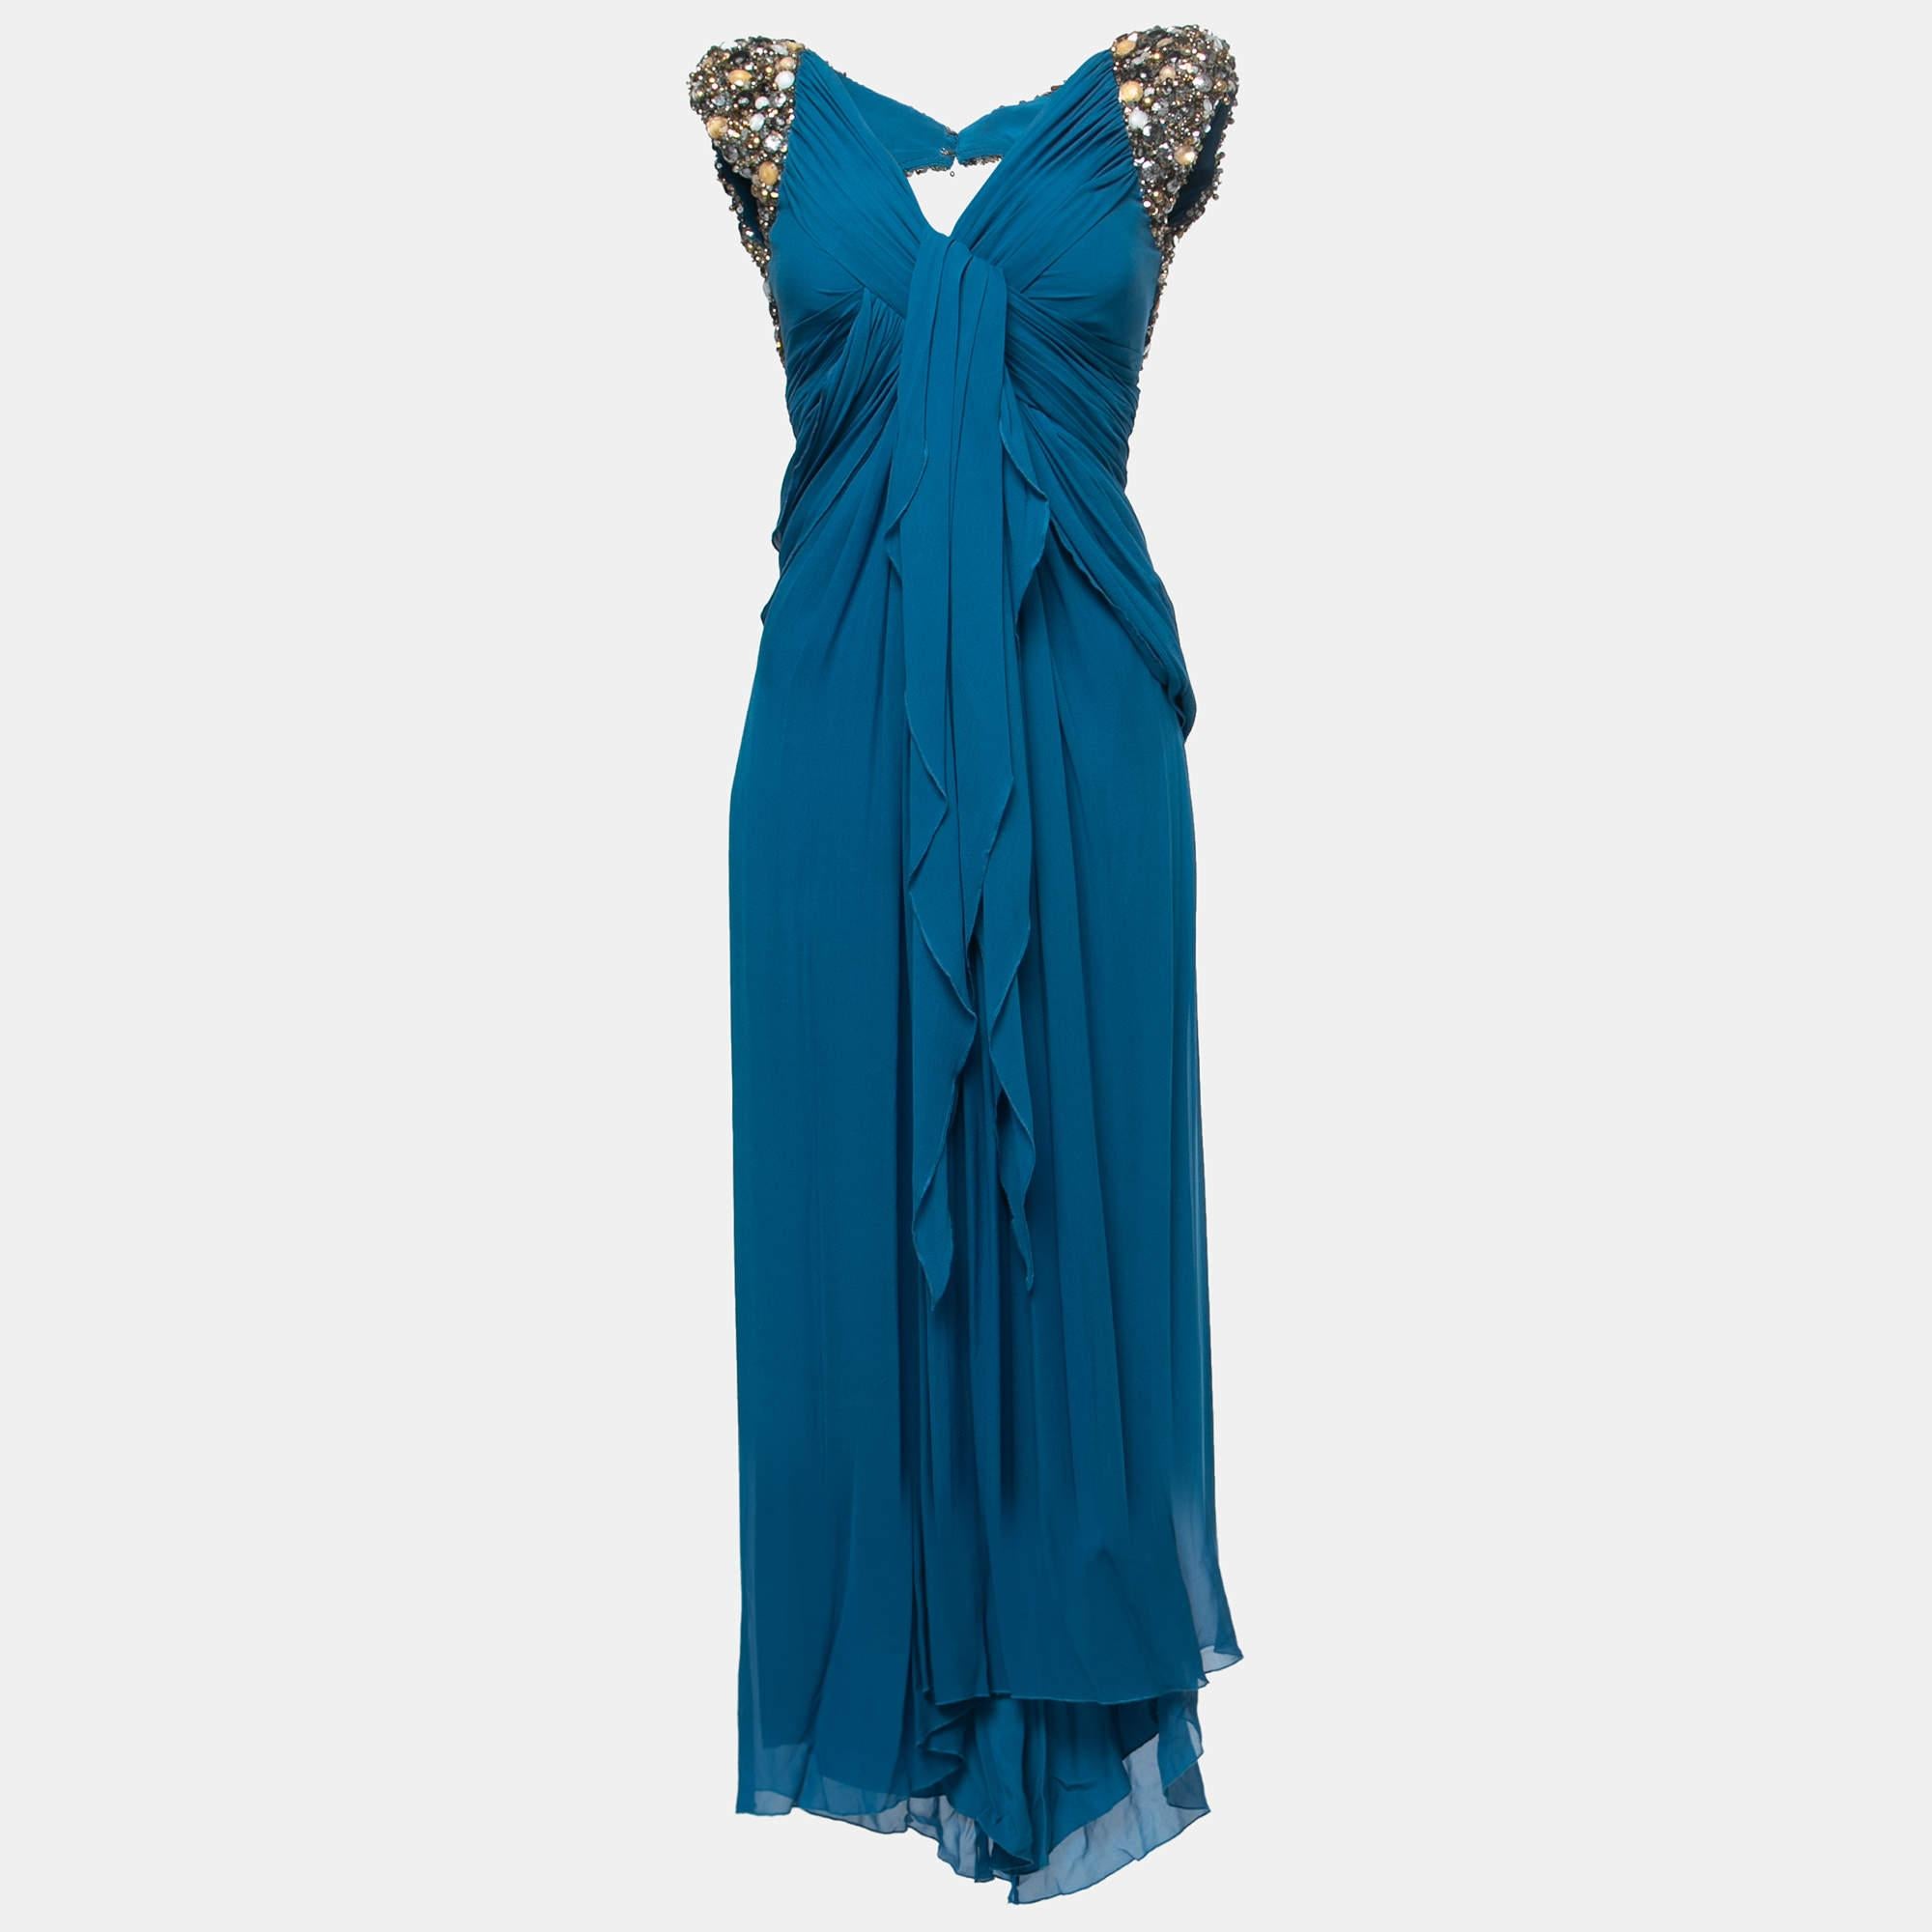 Created with embellished panels and elegant drapes, this Elie Saab sleeveless gown has a feminine look and a beautiful silhouette. It is sewn for a comfortable fit and finished with a zipper.

Includes: Original Dustbag, hanger
